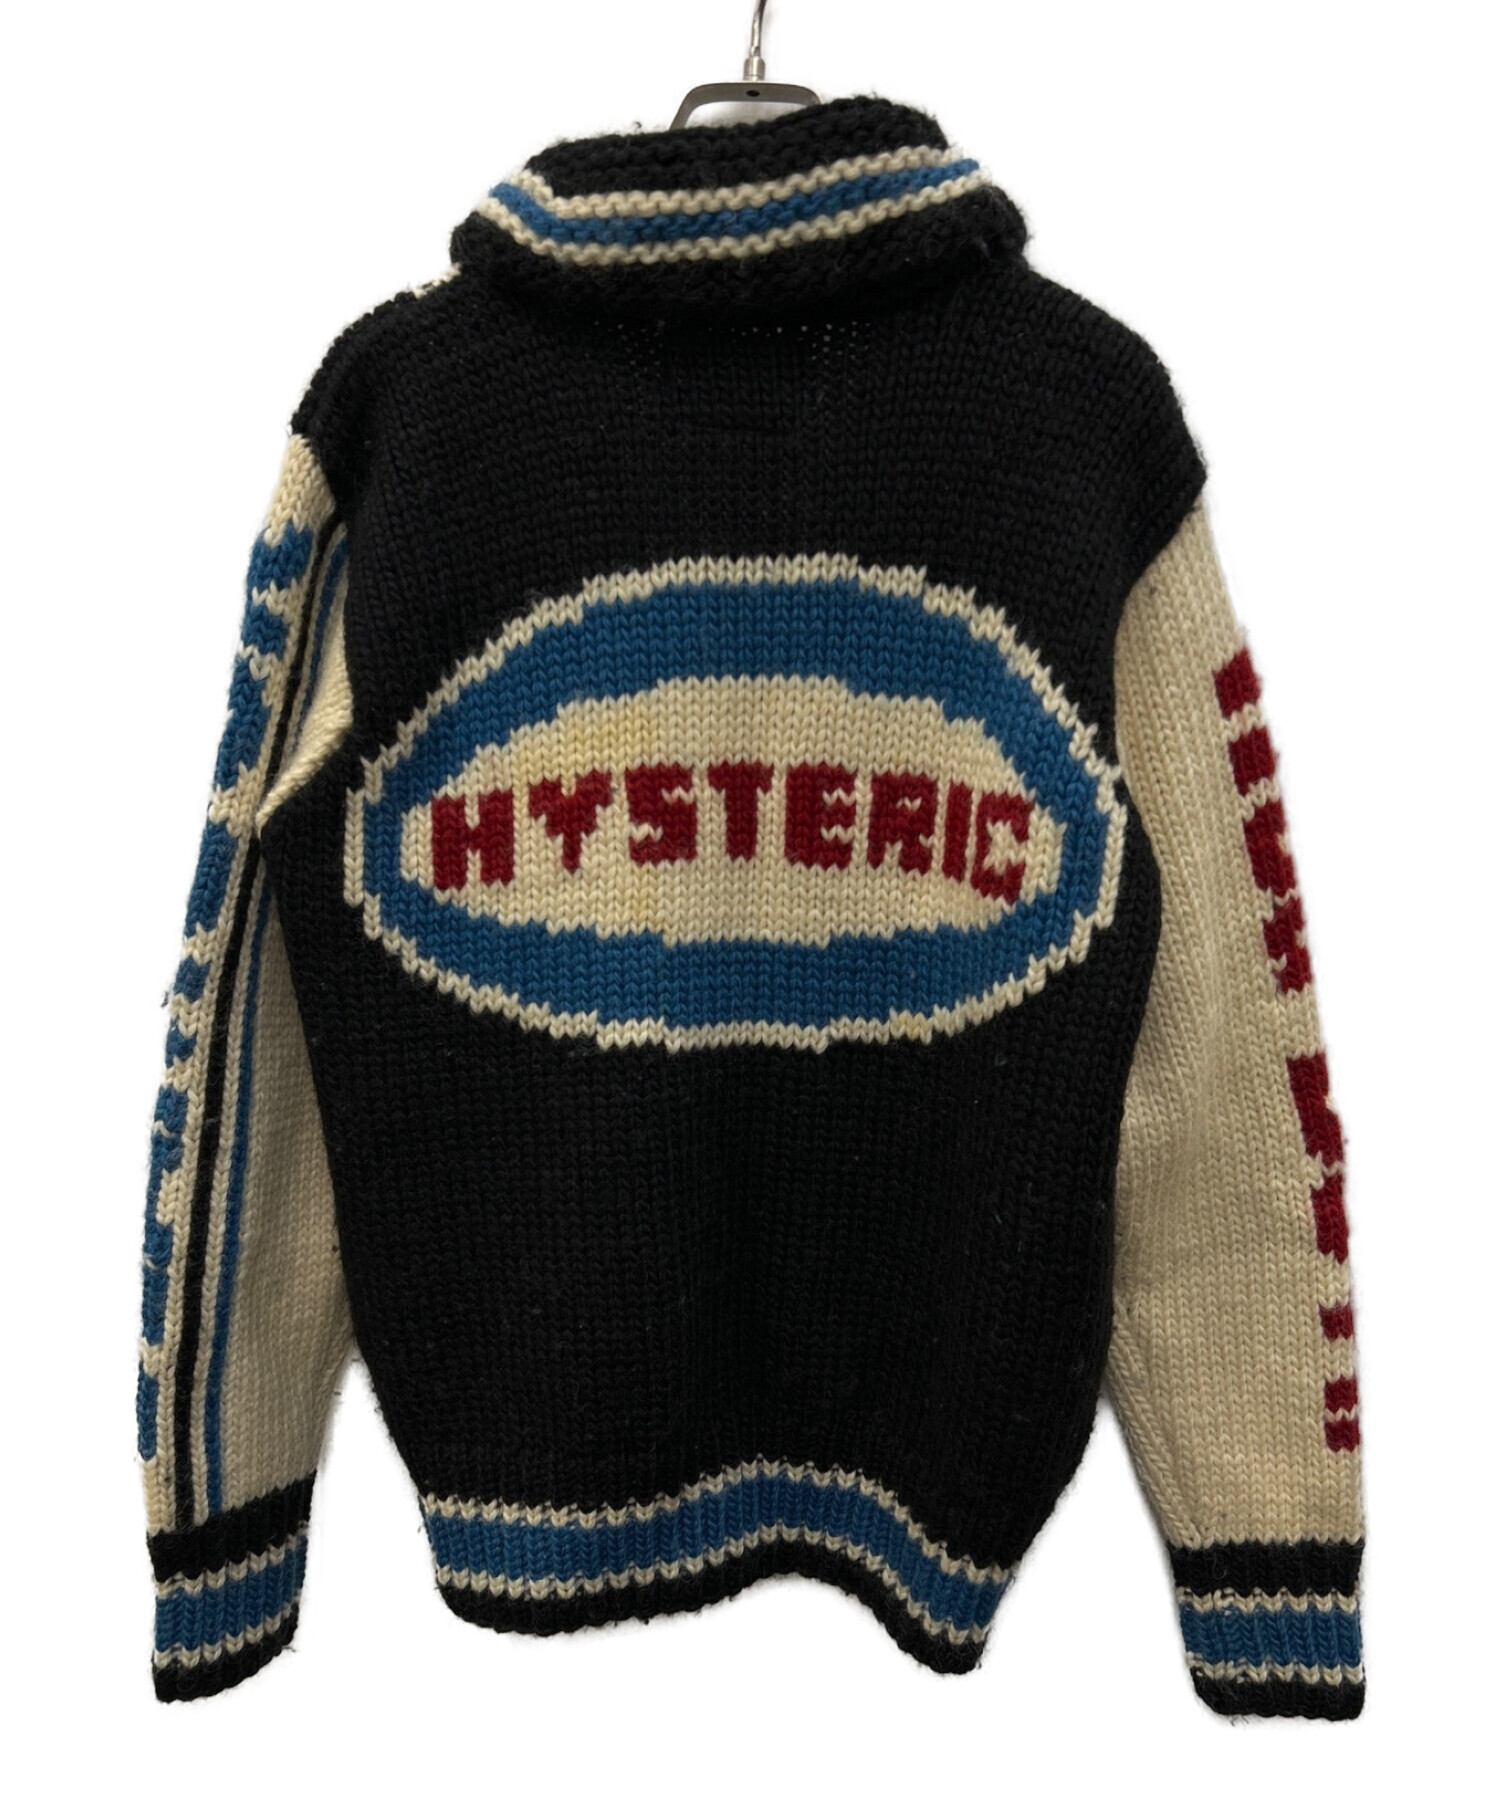 HYSTERIC GLAMOUR knit